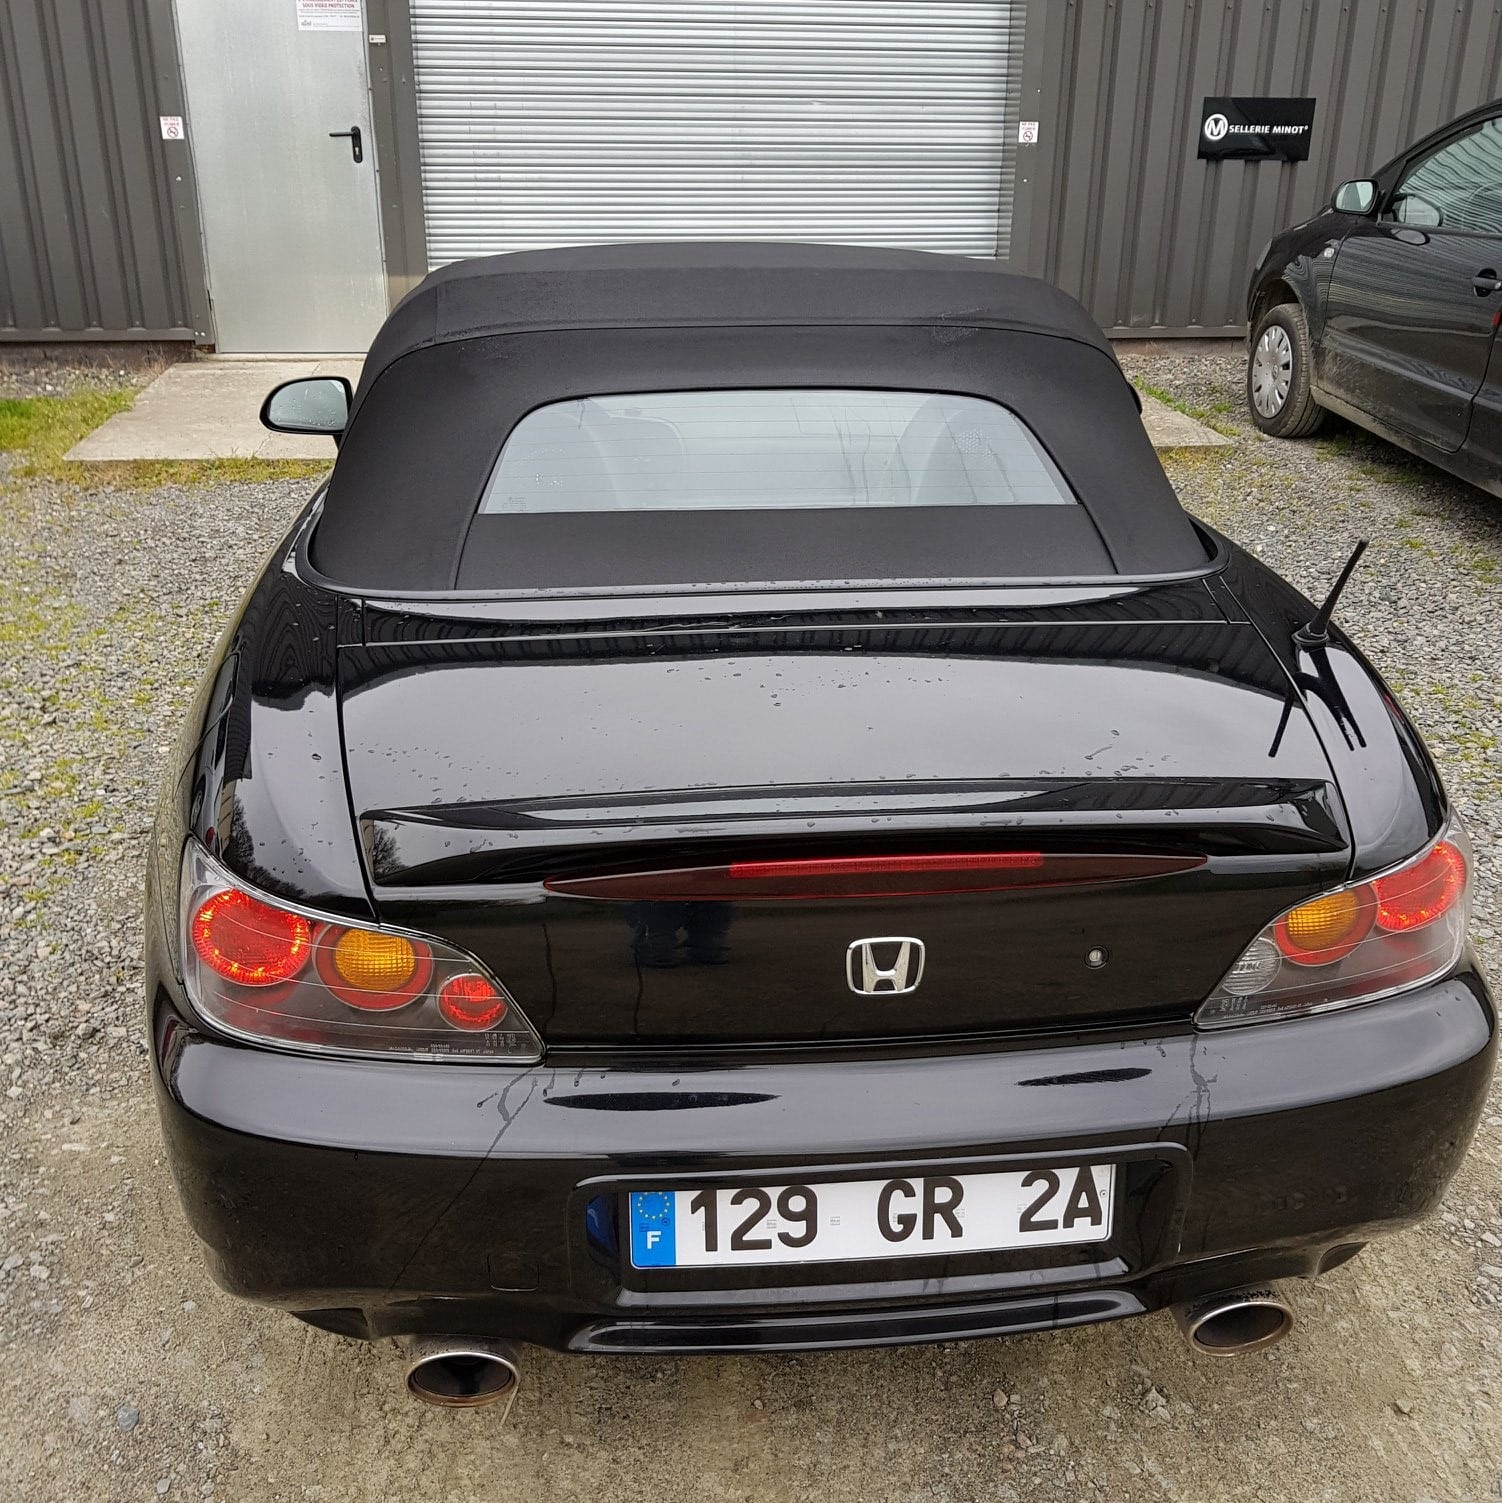 Remplacement capote HONDA S2000 - SELLERIE MINOT